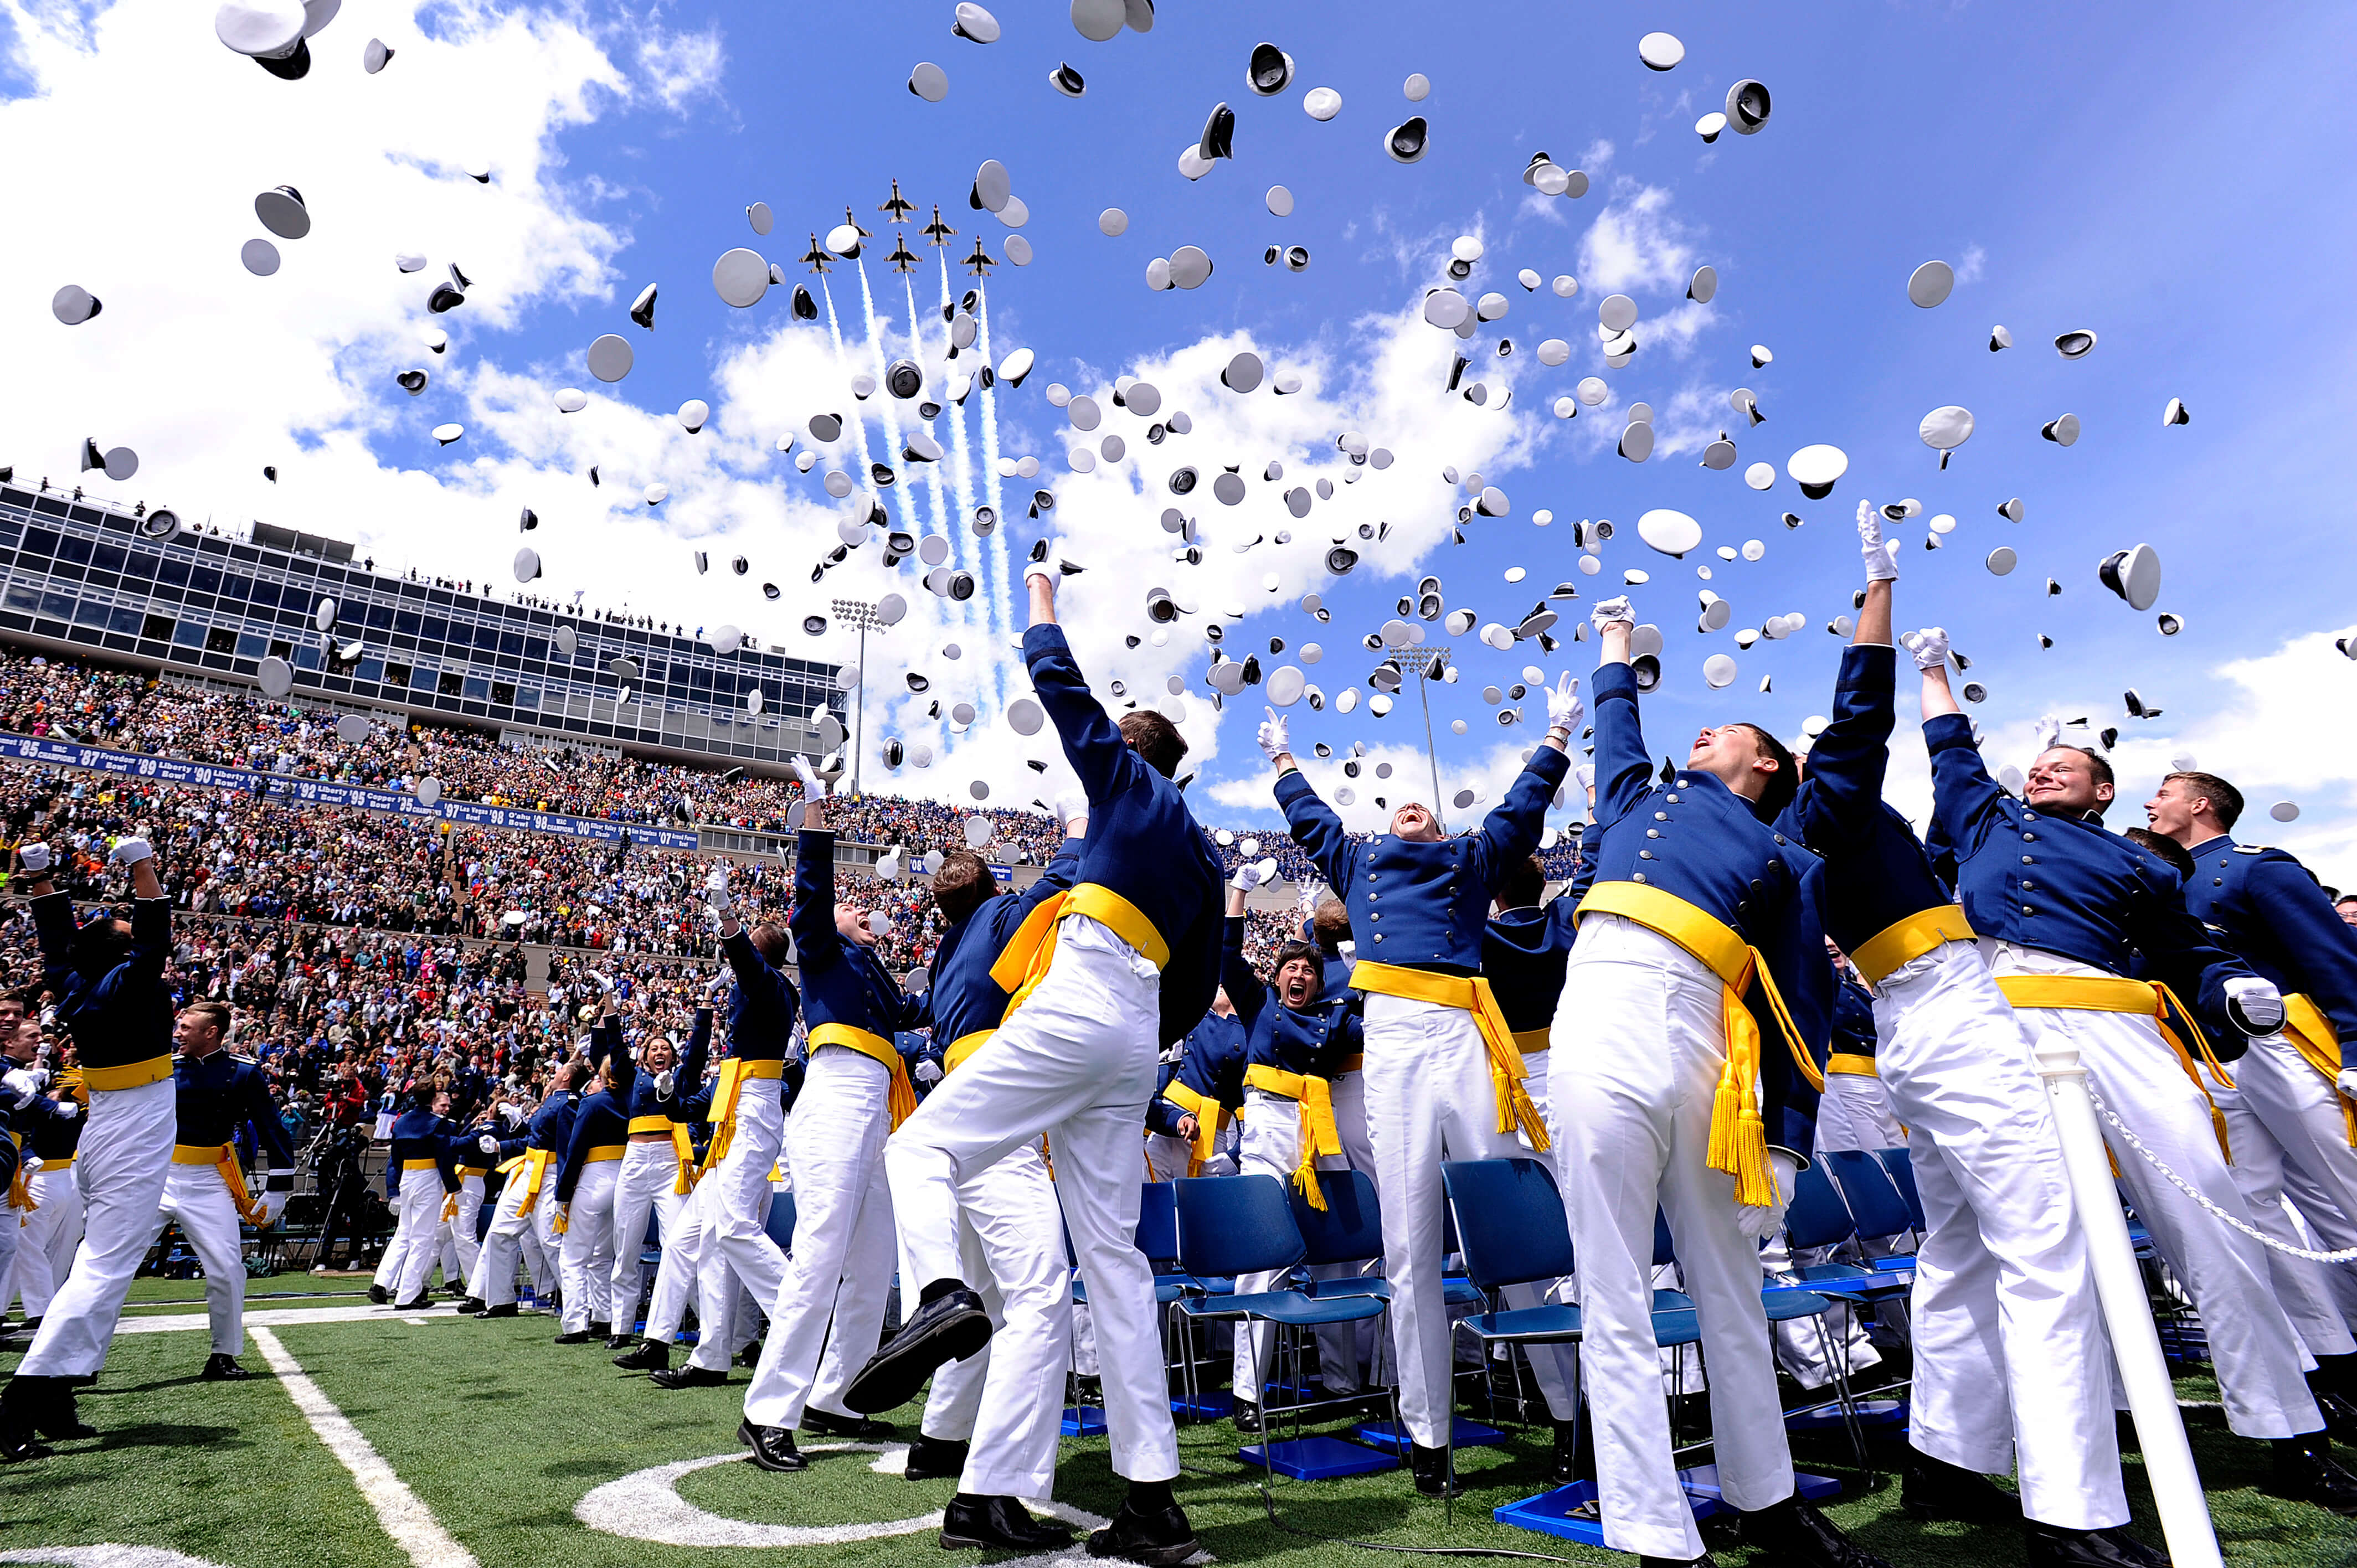 Newly commissioned second lieutenants celebrate at the end of the Air Force Academy's Class of 2011 graduation ceremony May 25, 2011